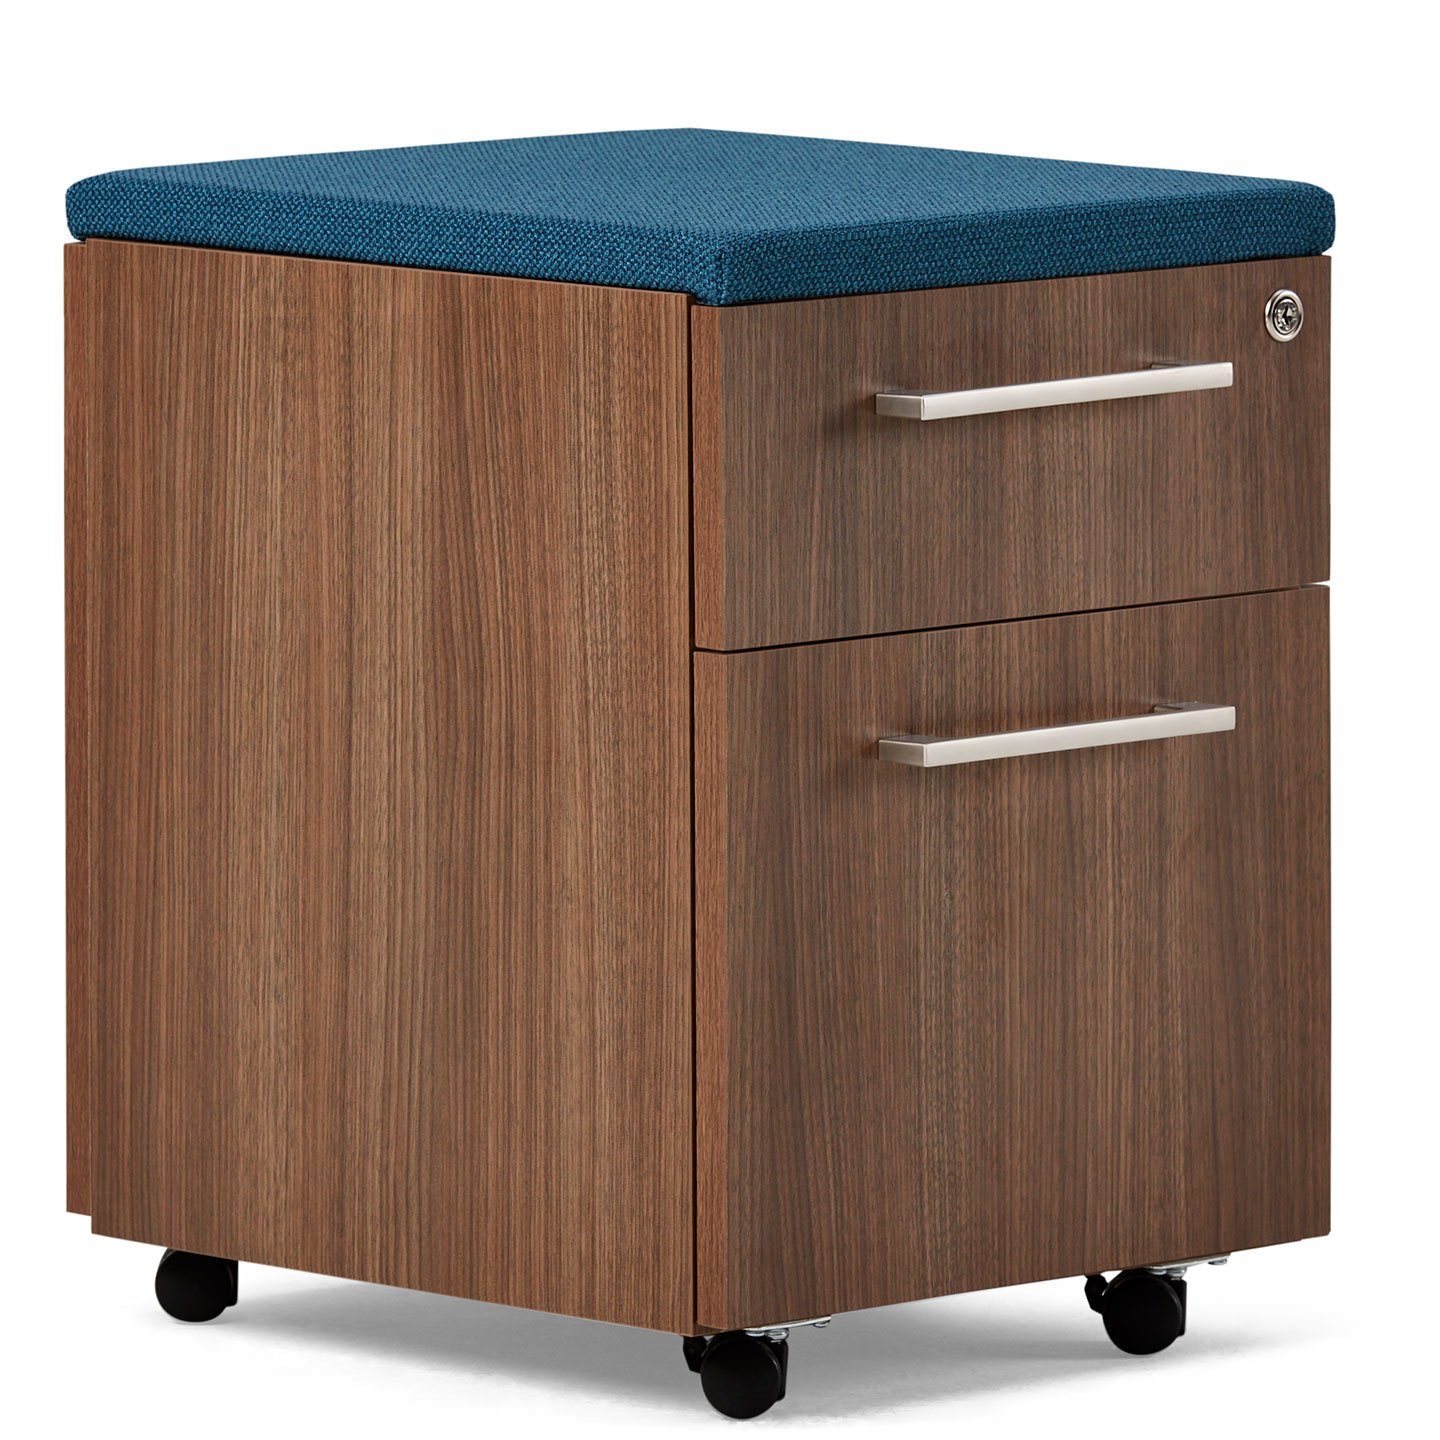 Compose pedestal in wood with Linear drawer pulls and lock drawer and blue cushion on top. 